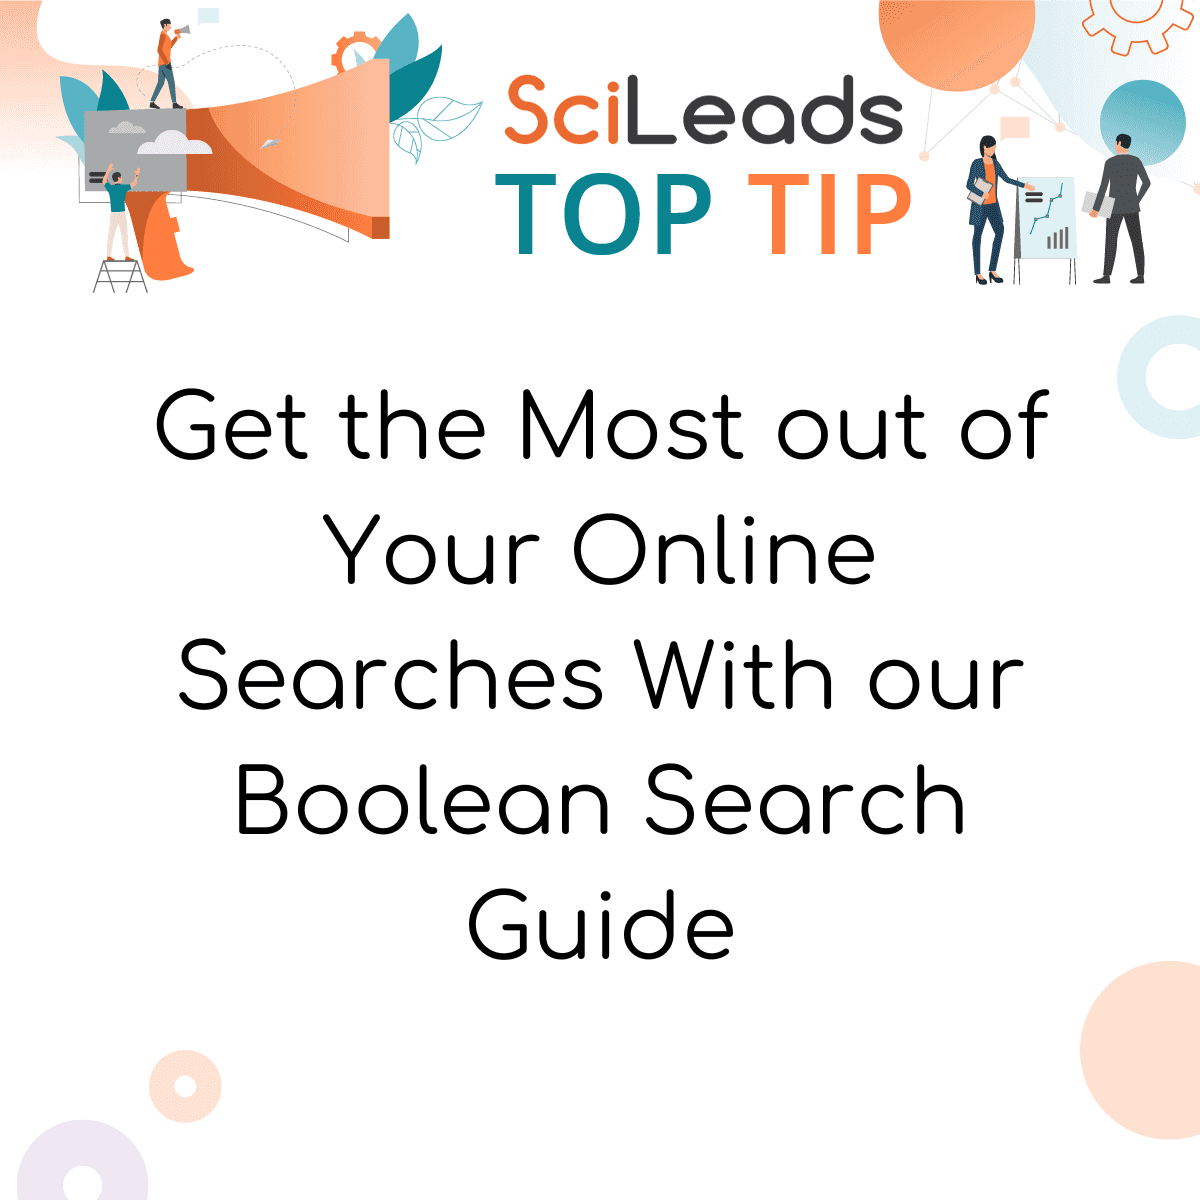 Getting the Most out of Your Online Searches